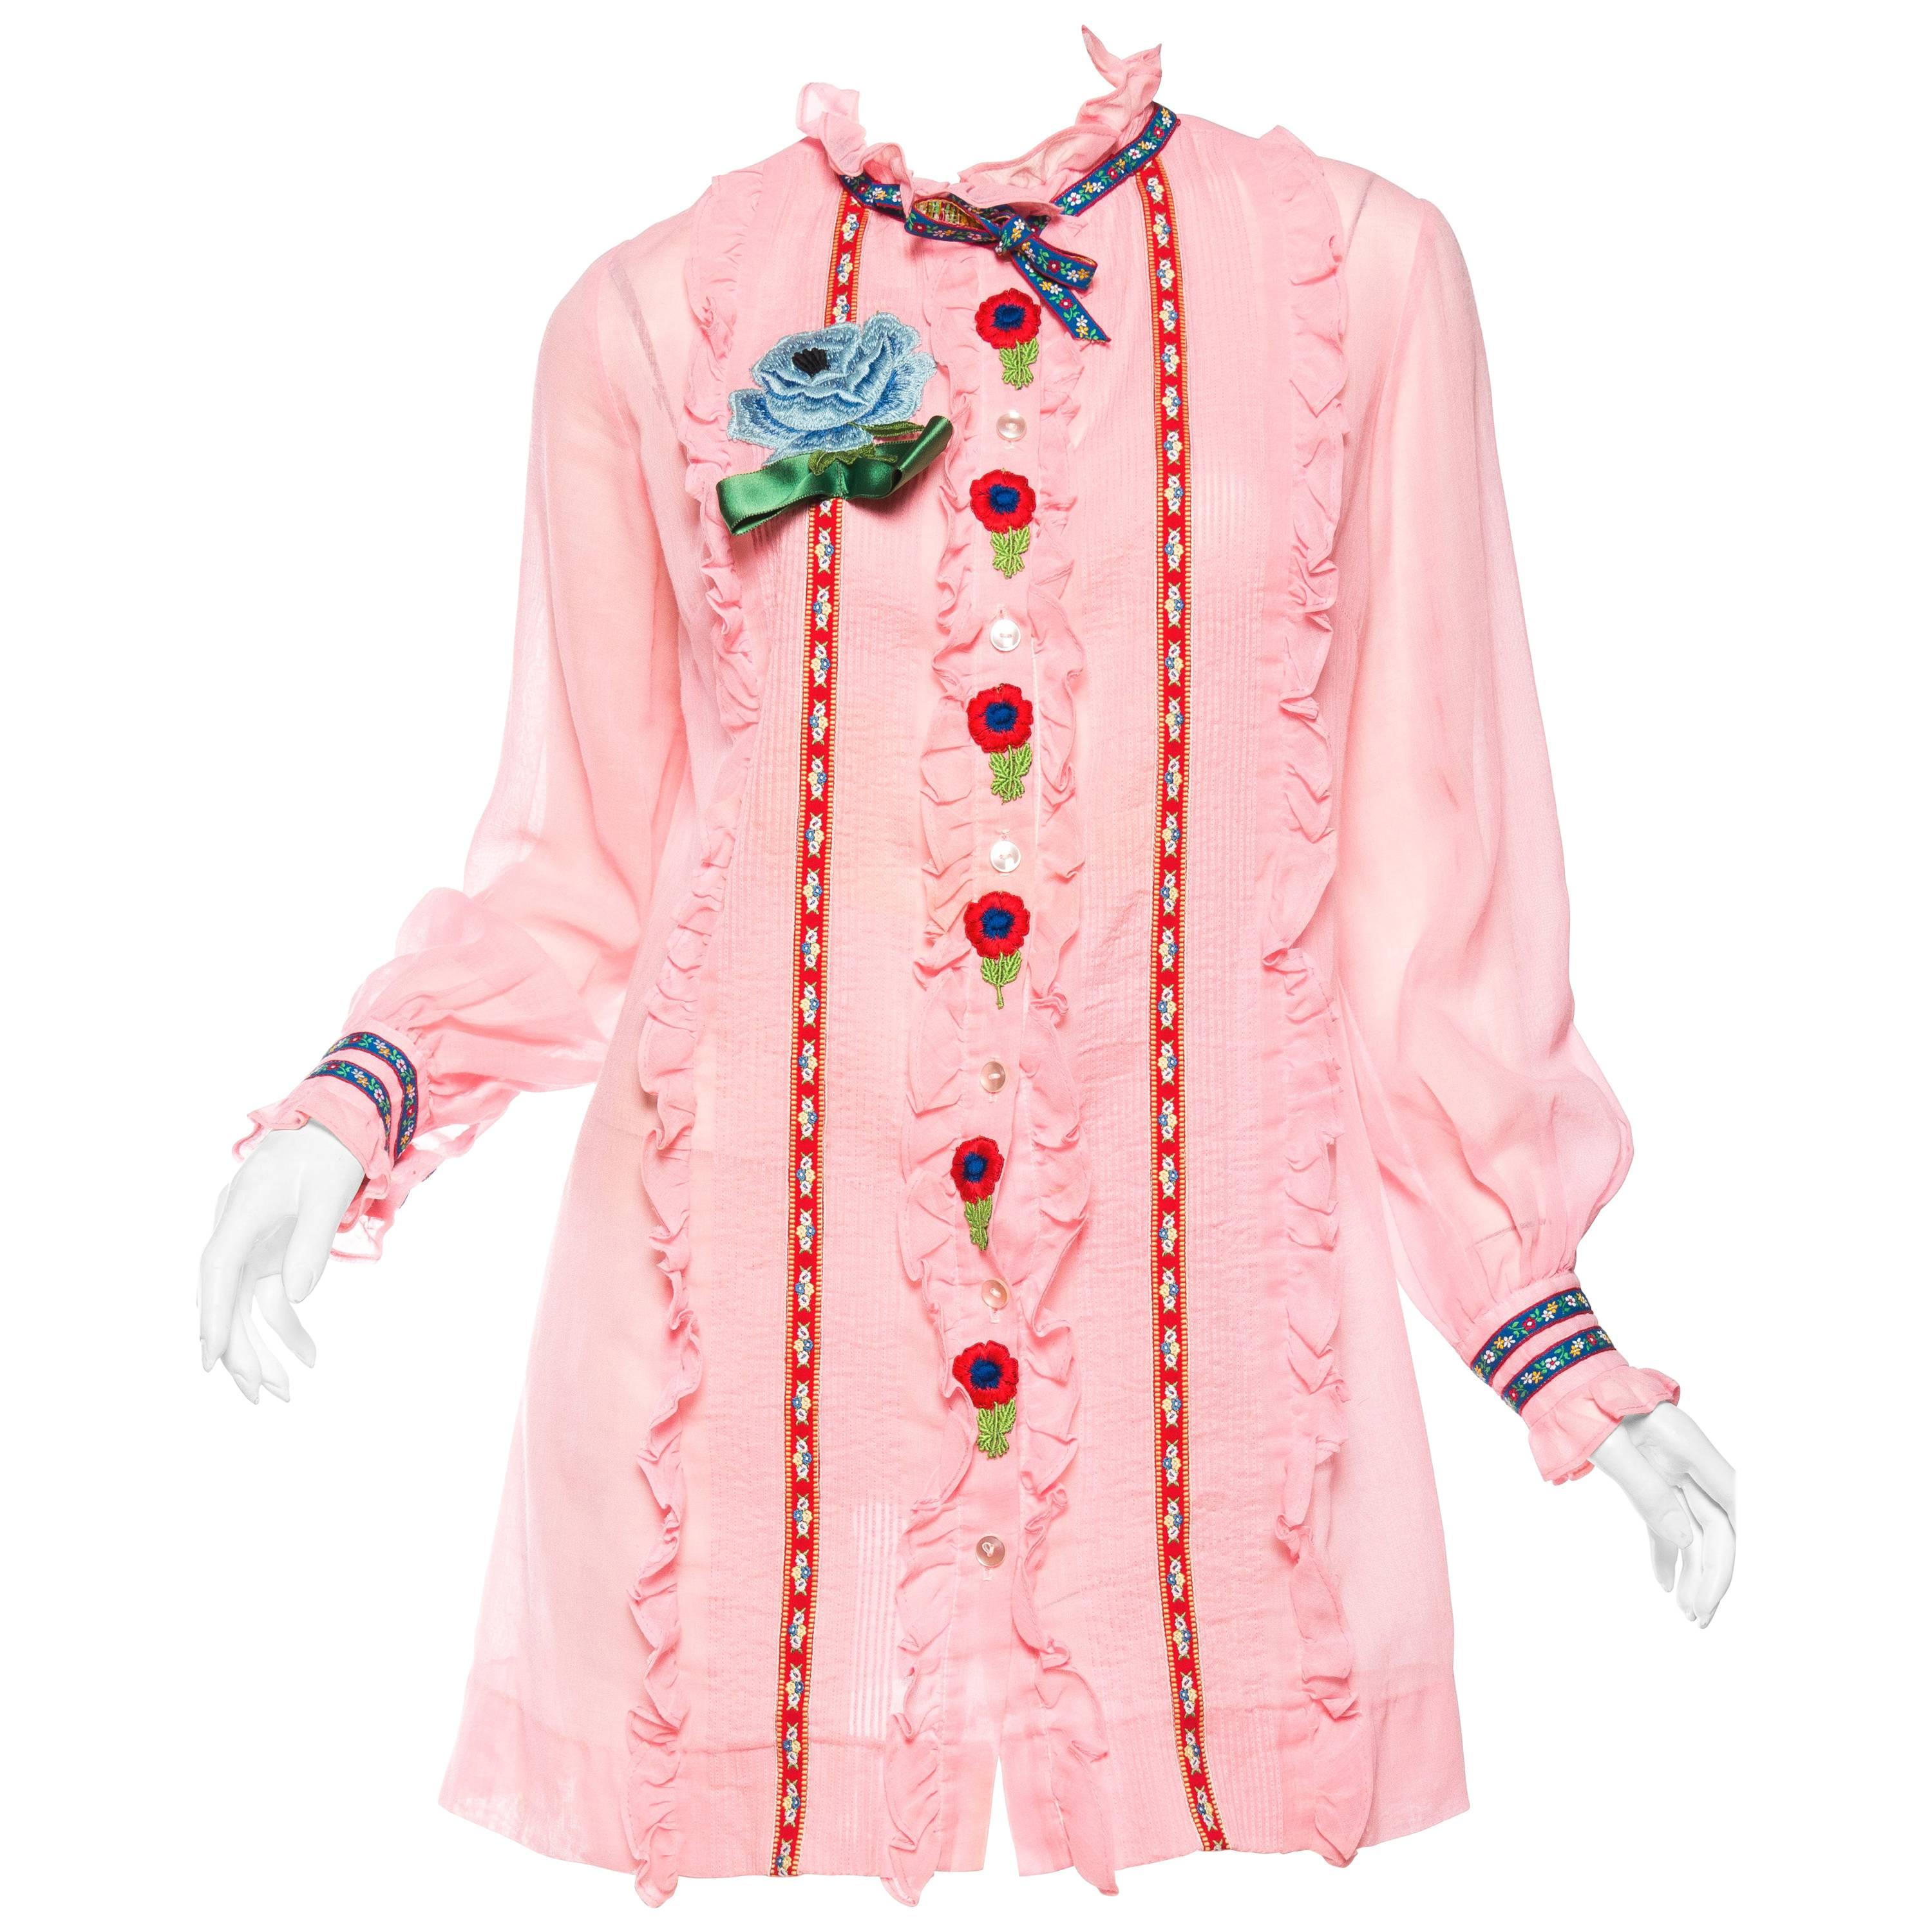 Gucci Style 1960s Baby-Doll Dress with Embroidery and Bows